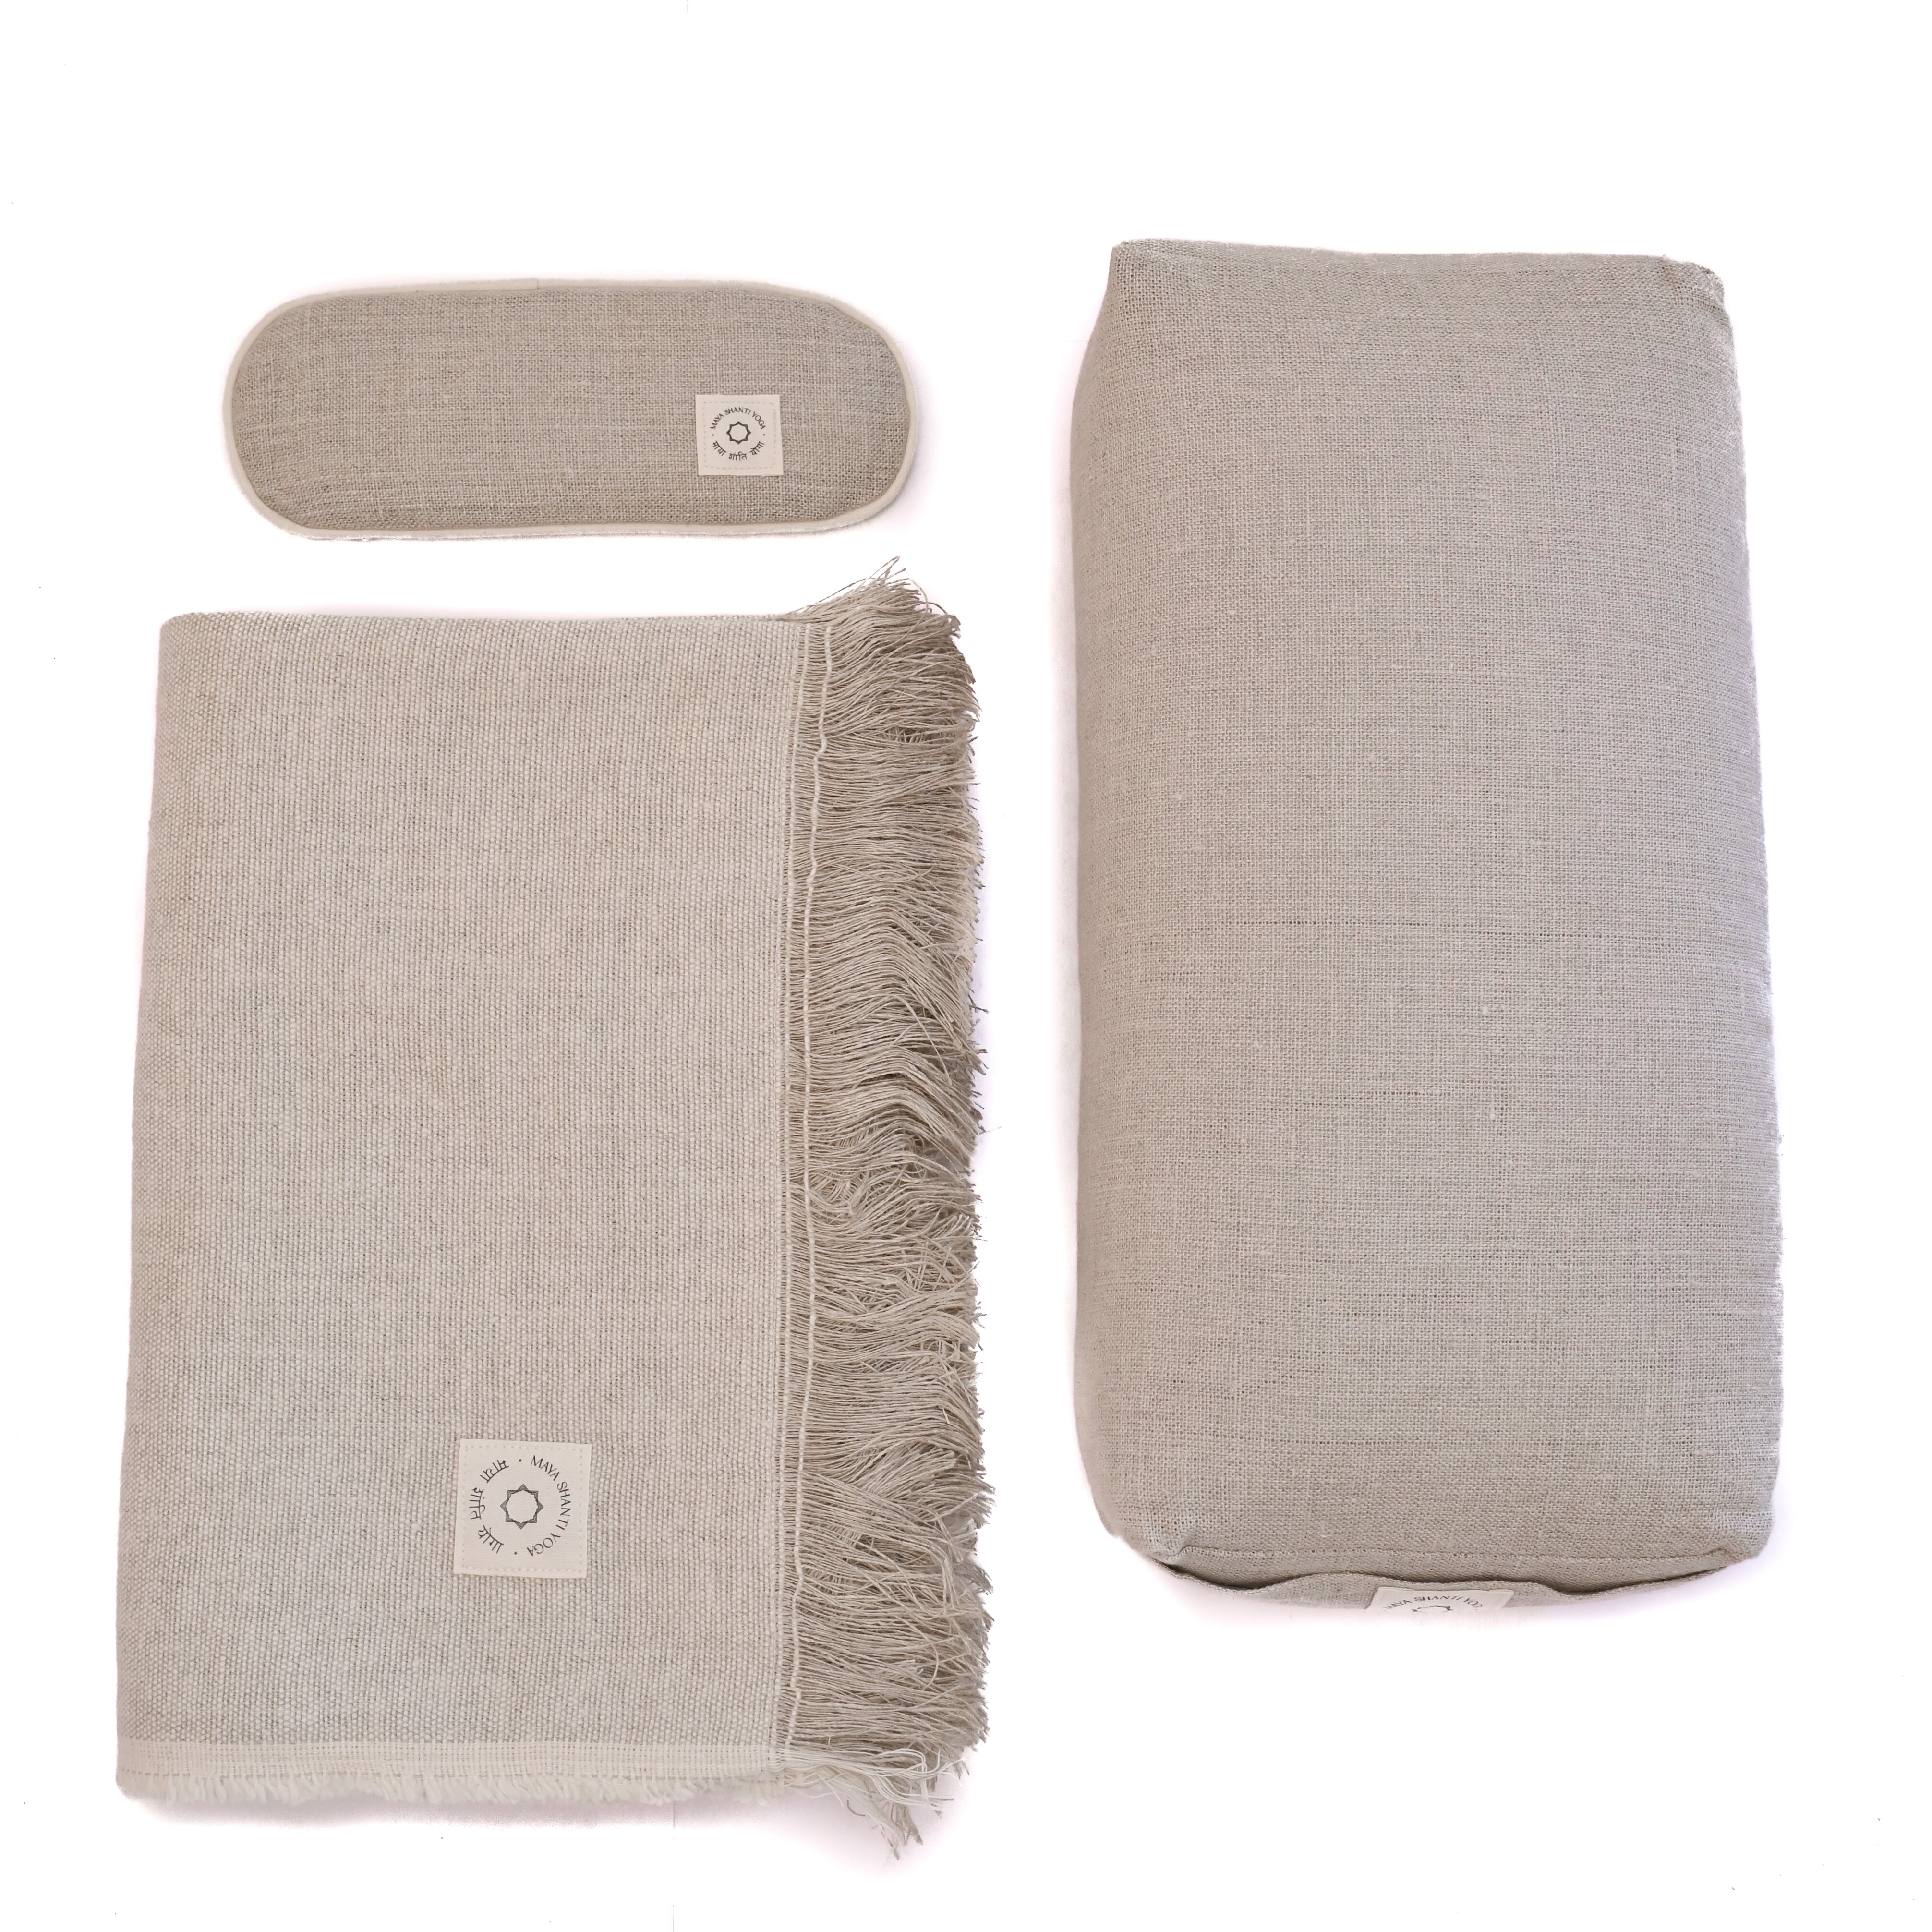 A set of MSY Meditation Starter Bundles from Maya Shanti Yoga in a natural hemp colour, perfect for enhancing mindfulness and meditation practices.